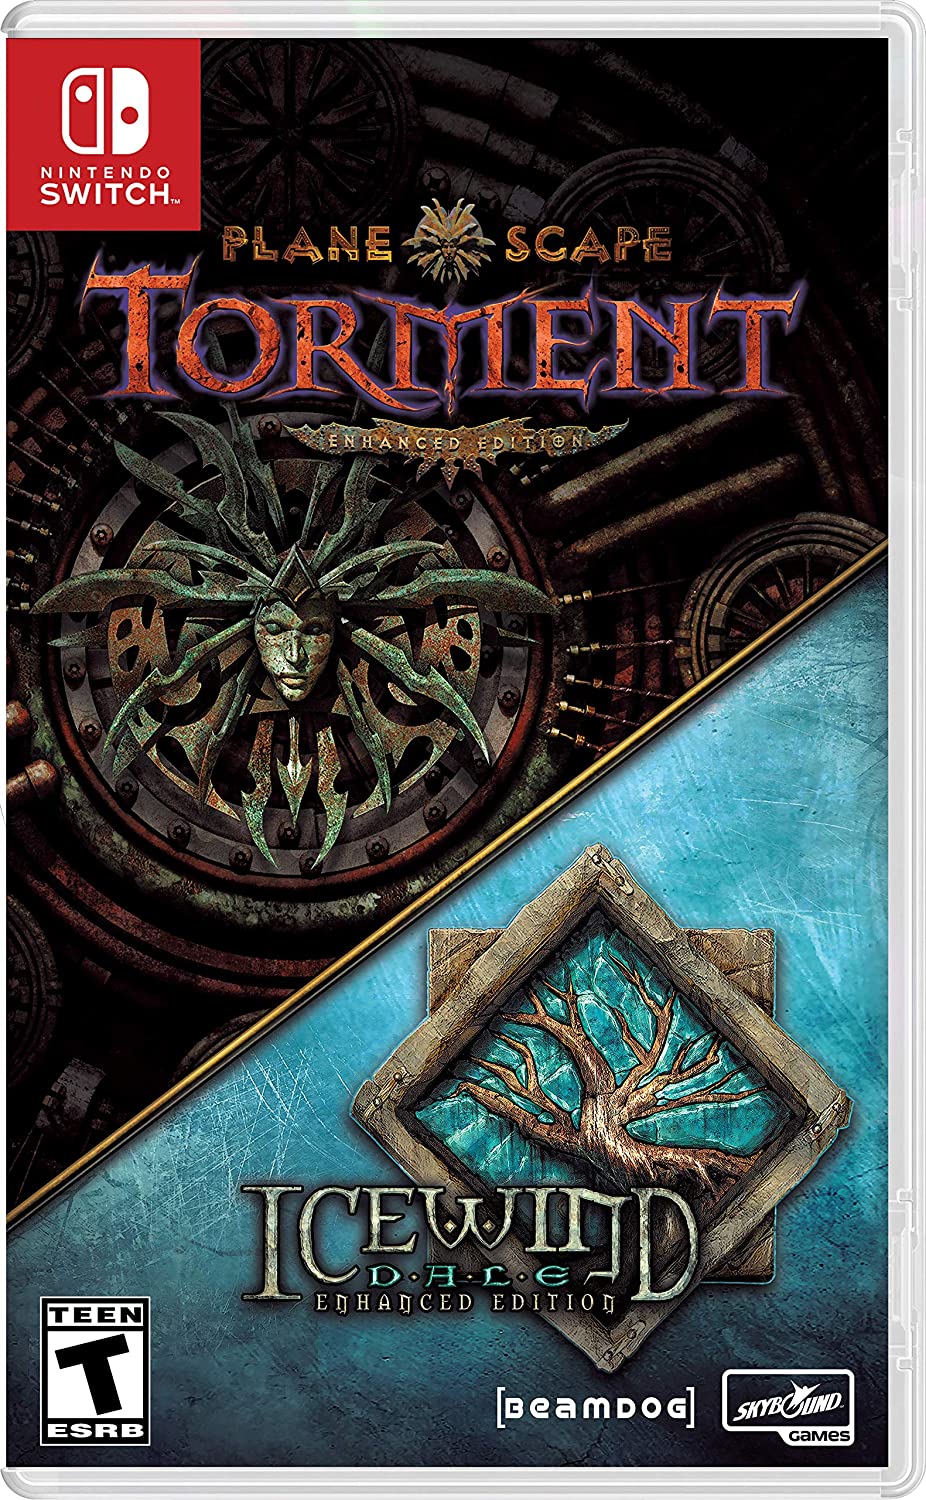 Planescape: Torment & Icewind